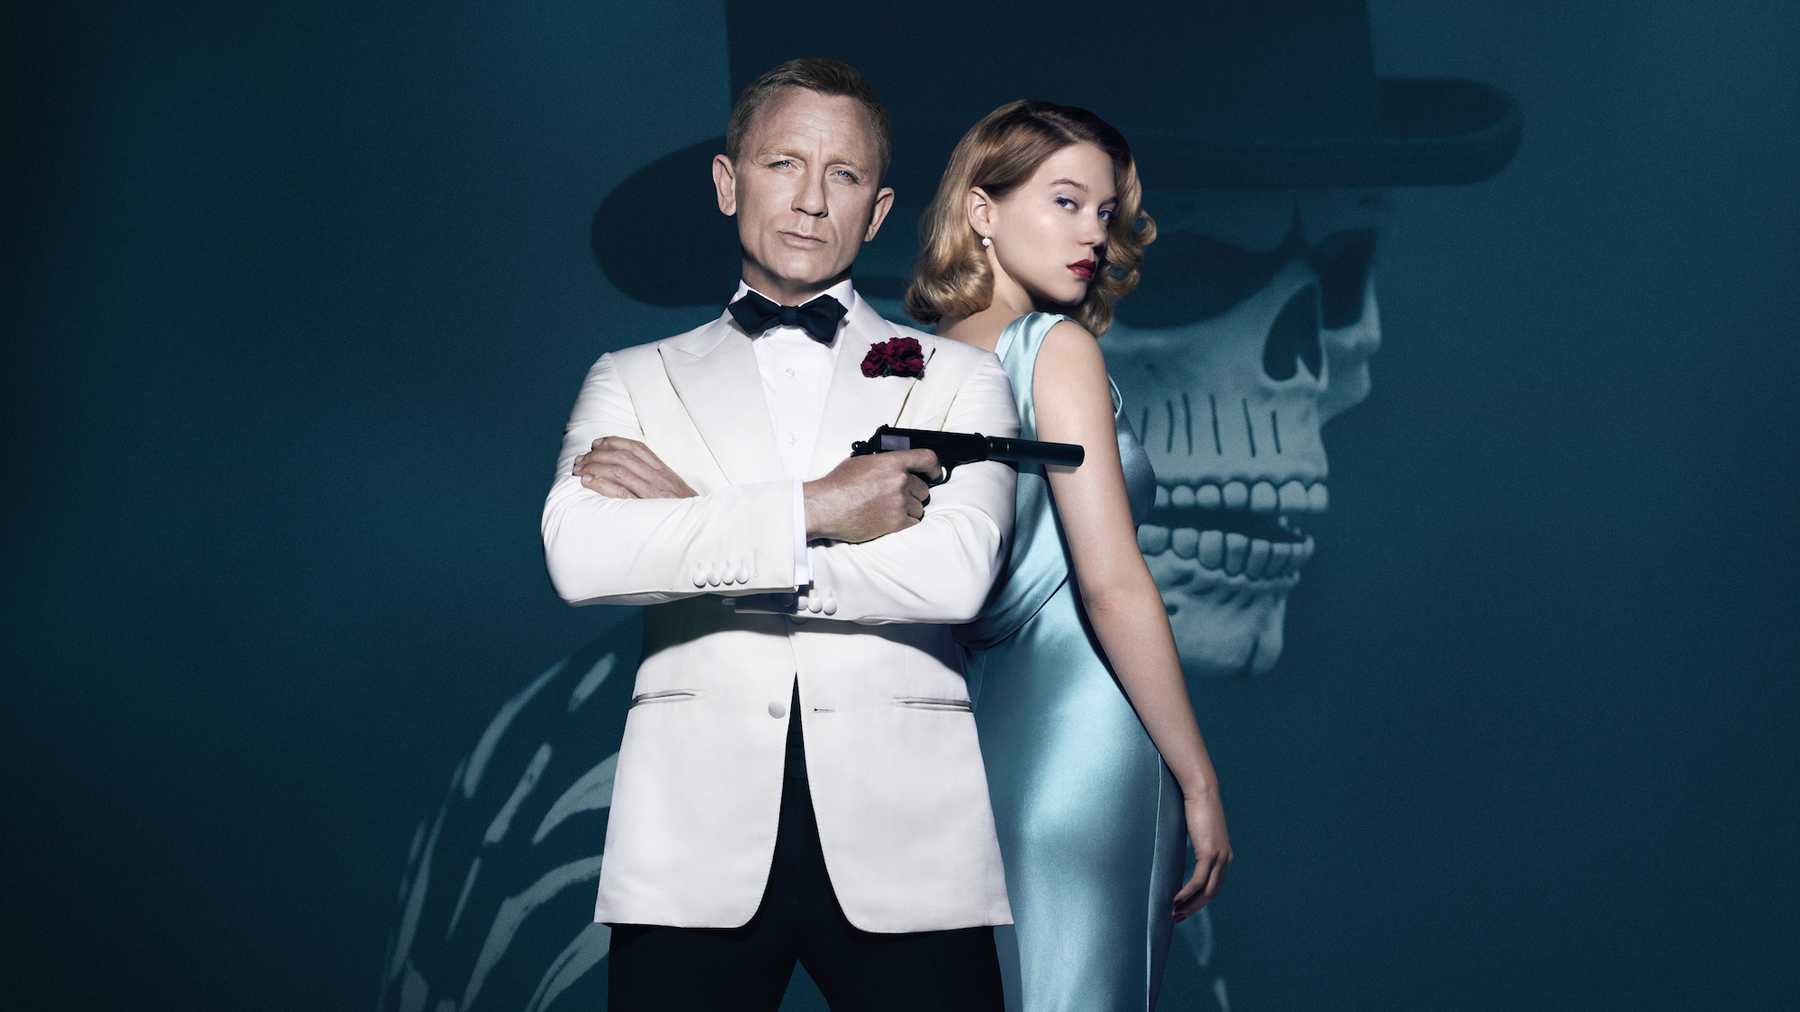 A promotional image for the James Bond movie Specter